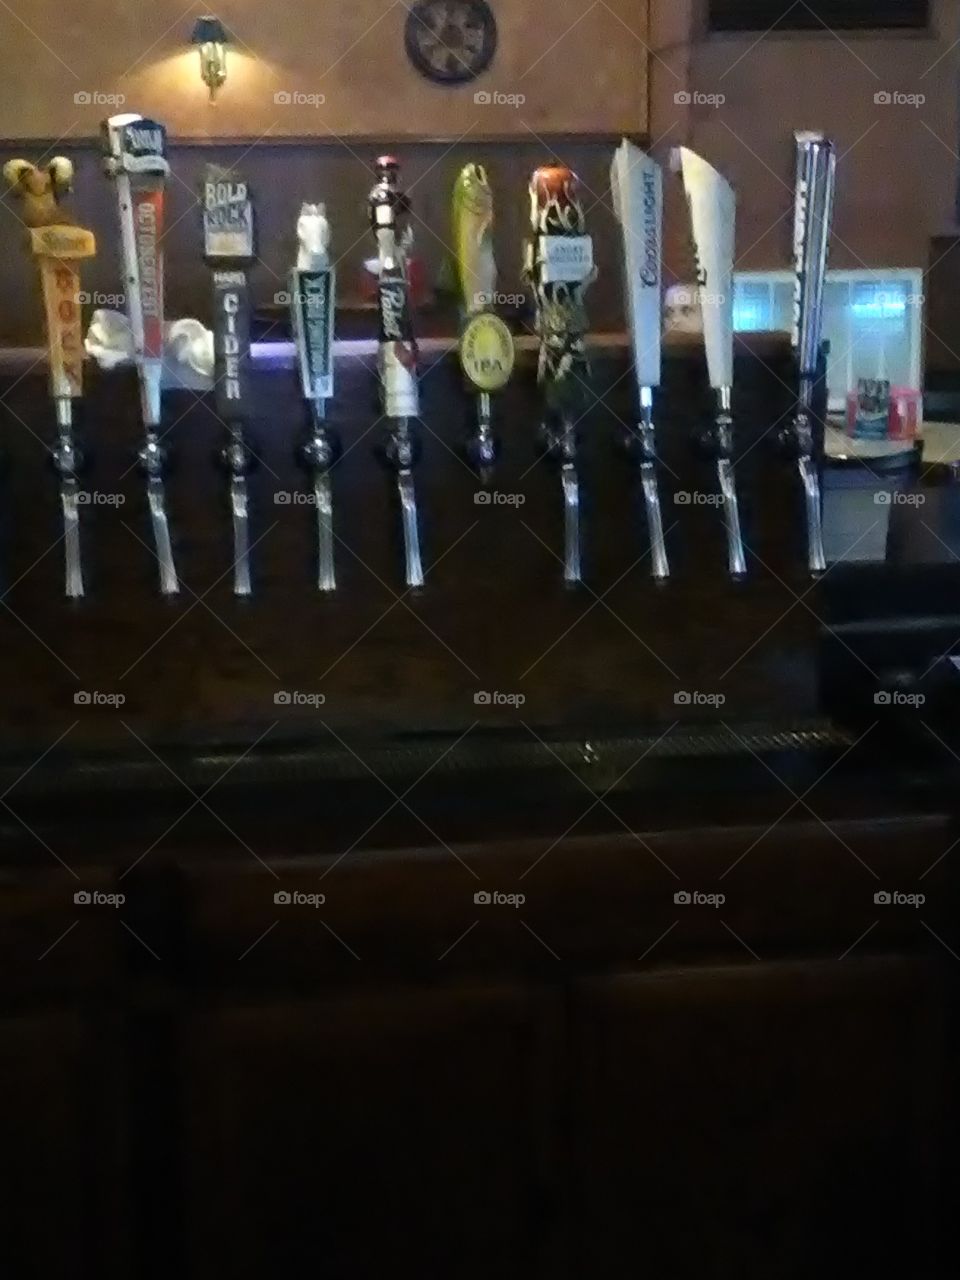 unique tap handles only in America hahaha